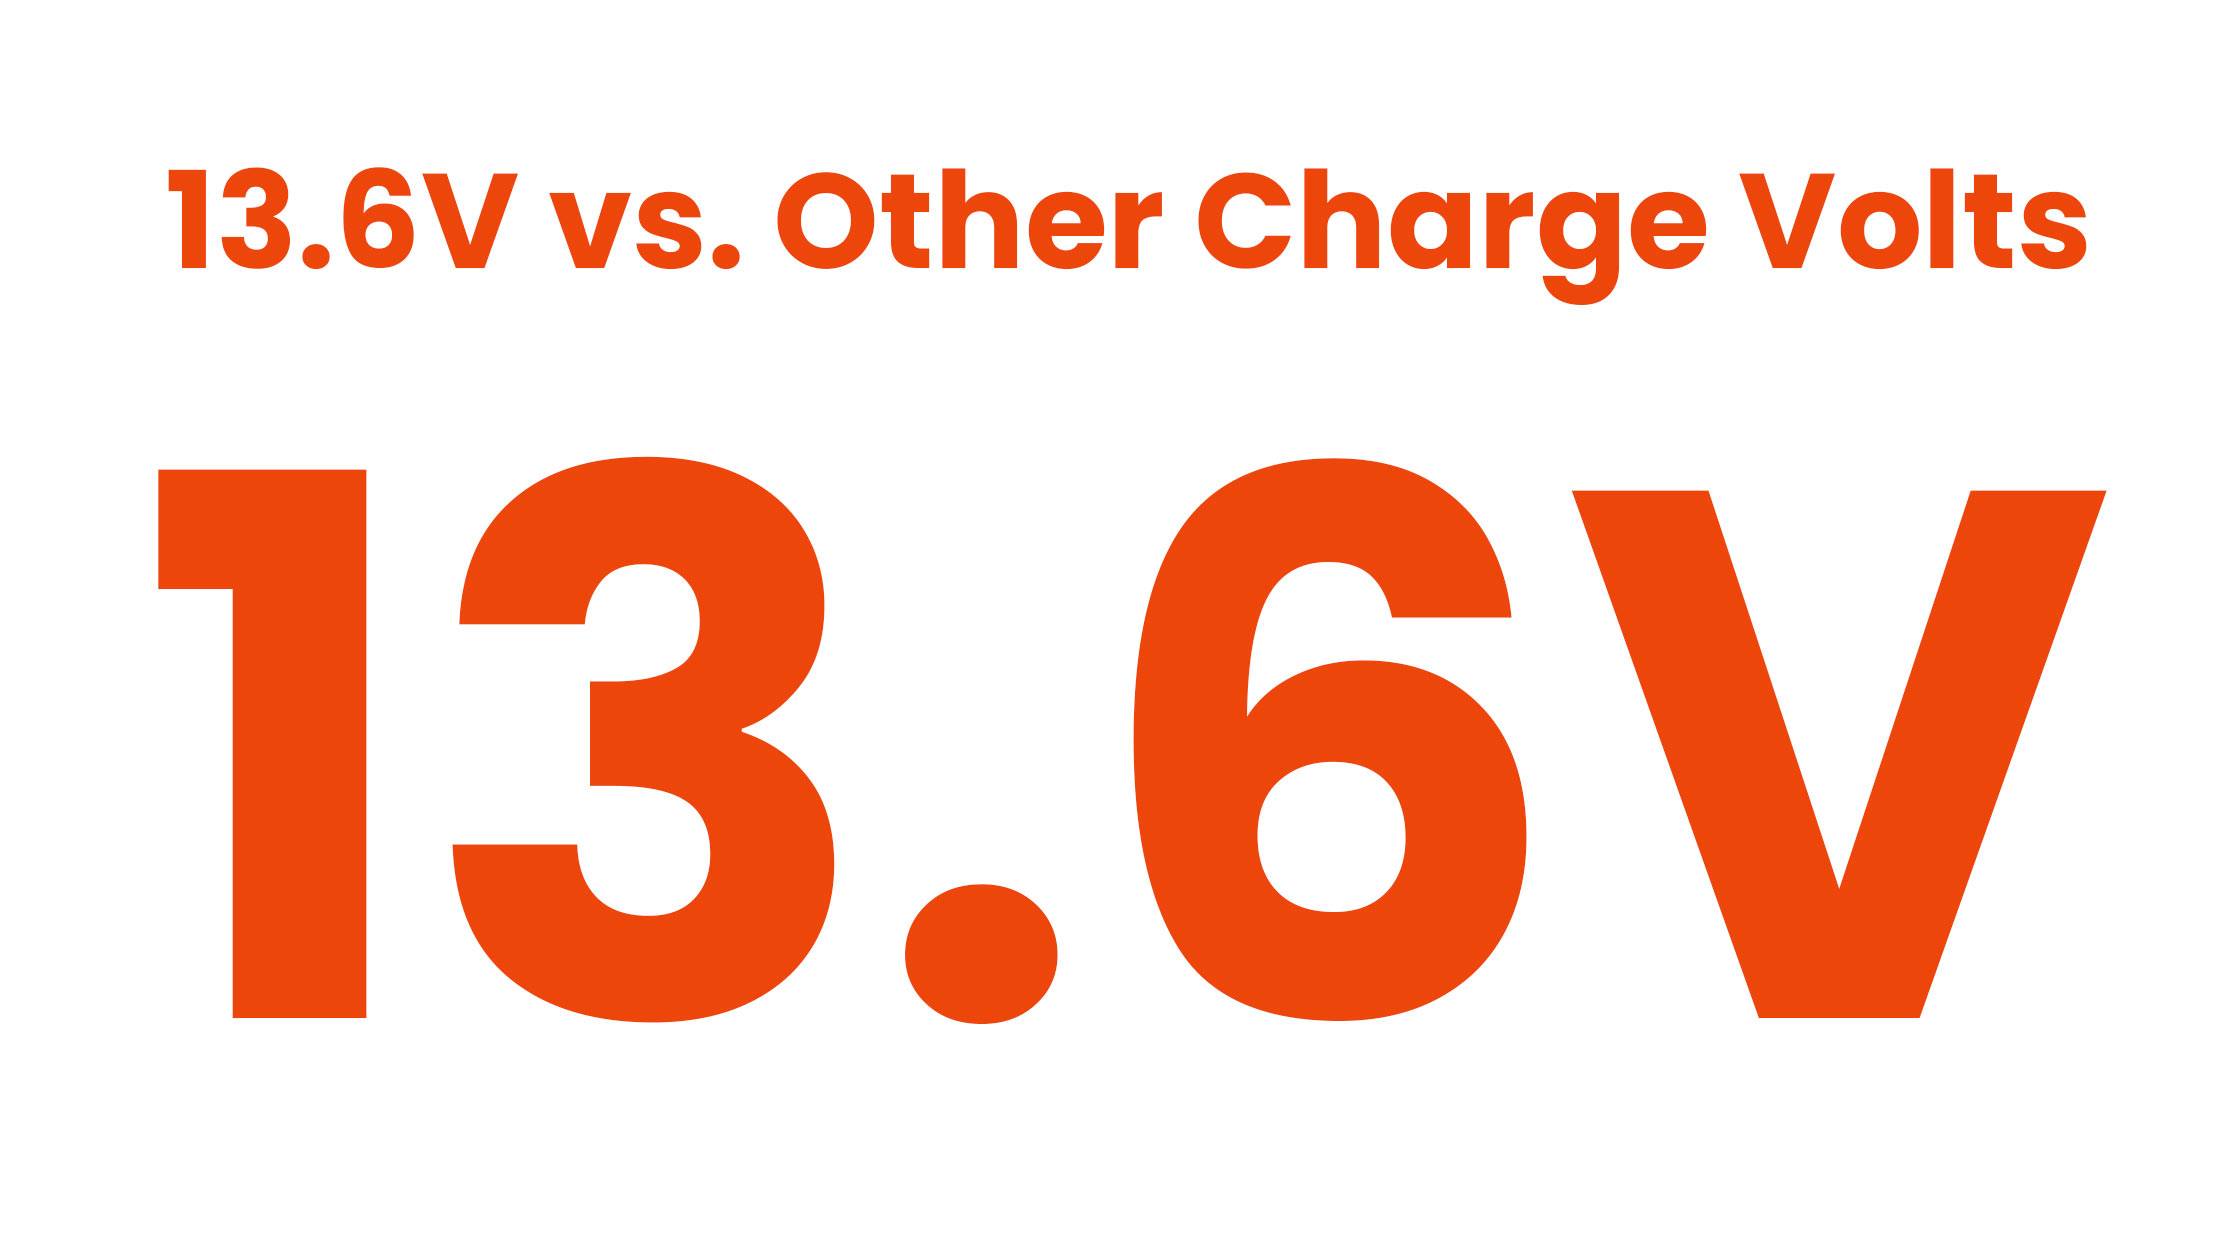 13.6 Volts vs Other Charging Voltages. Will 13.6 volts charge a battery?